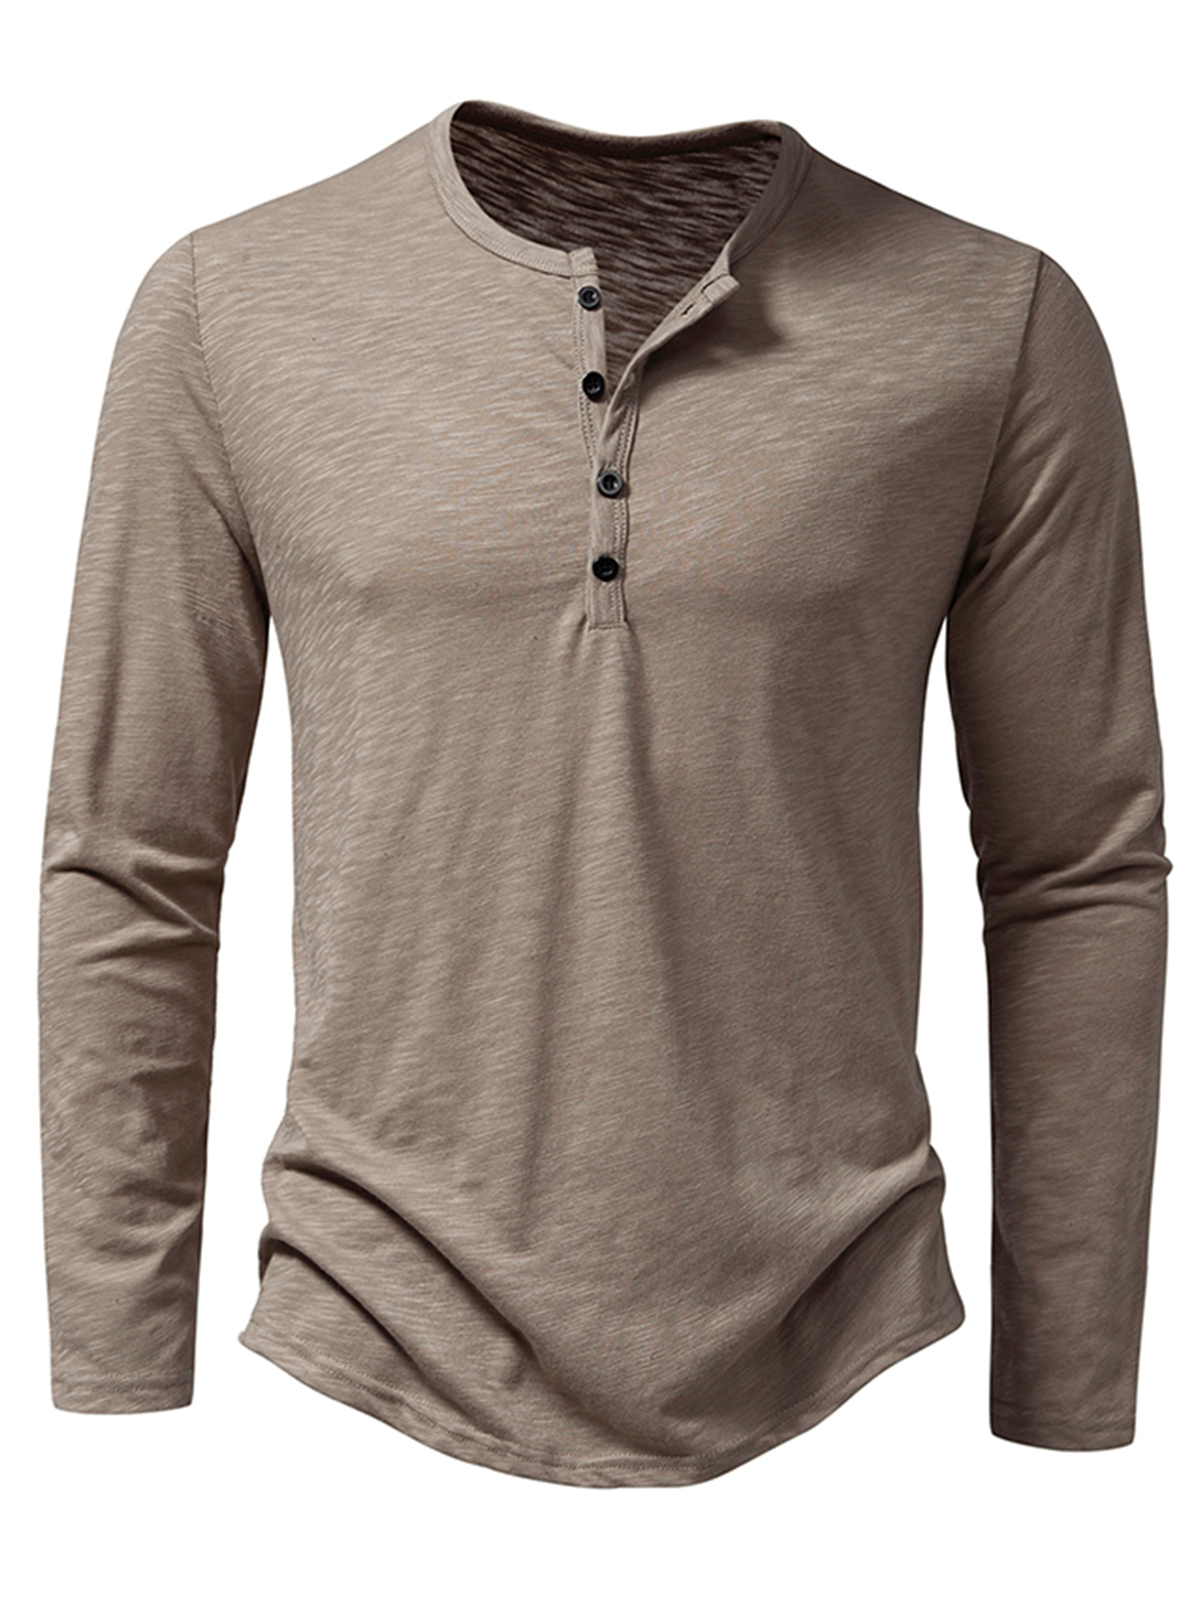 Men's Casual Henley Collar Tee Solid Color Long Sleeve T-Shirt